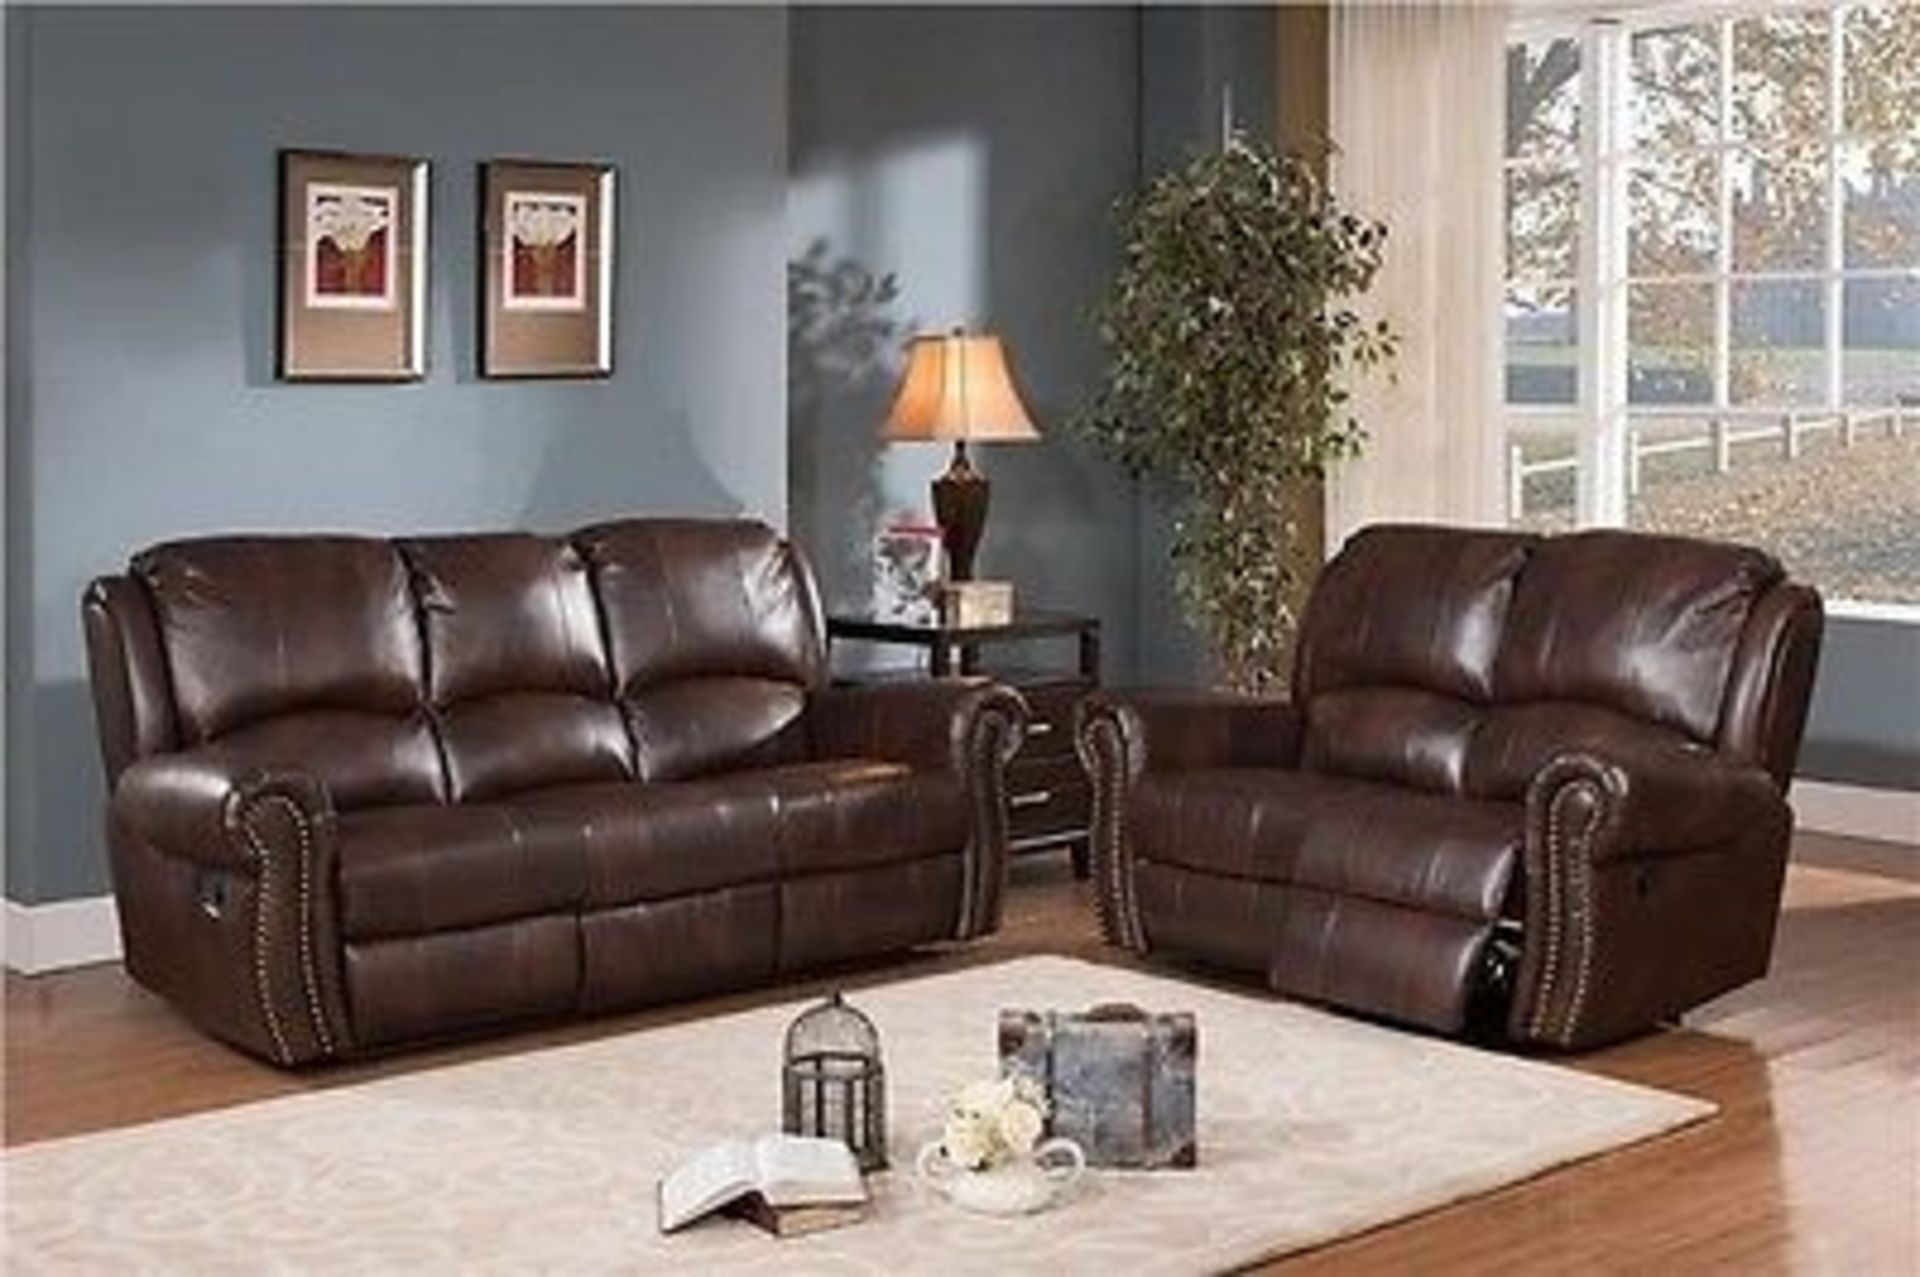 Brand New 3 Seater Plus 3 Seater Salisbury Deluxe Brown Leather Reclining Sofas